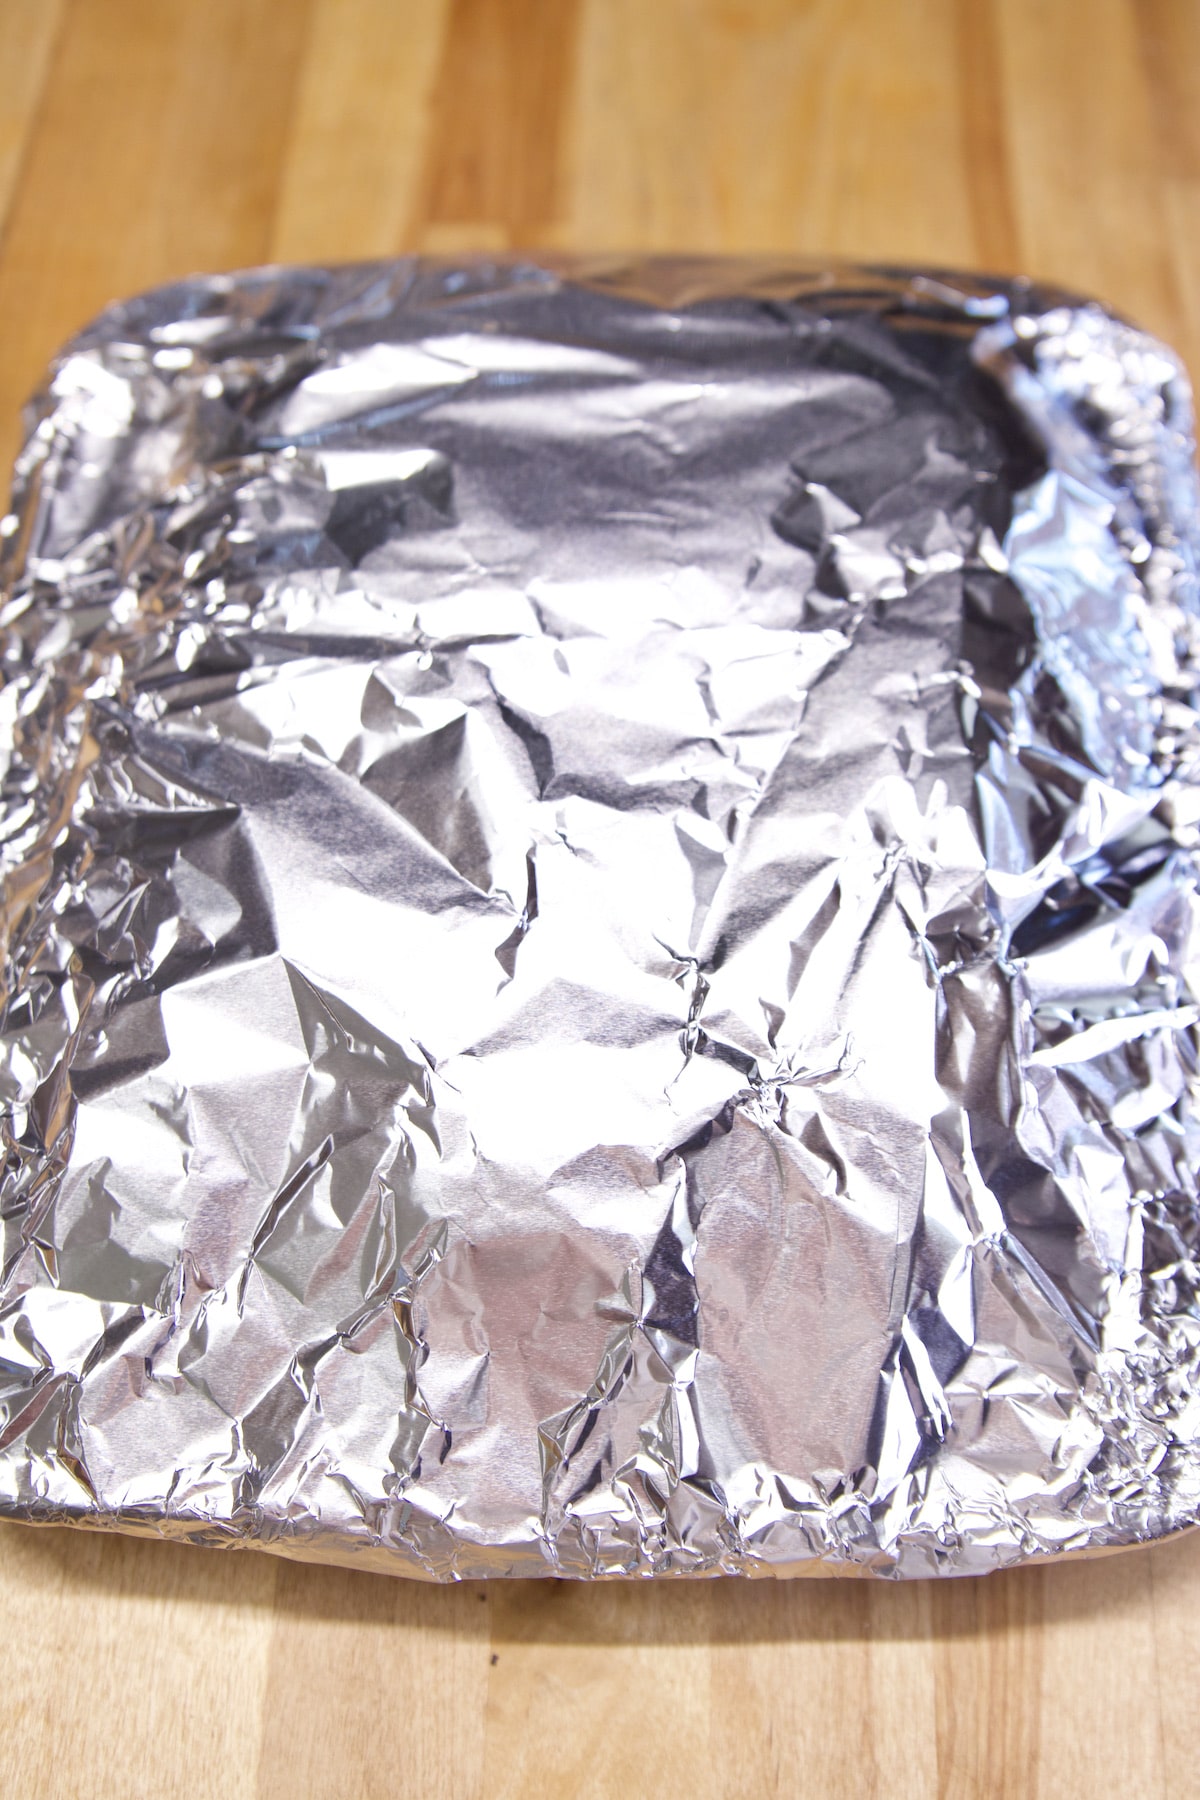 Foil covered pan of sliders.